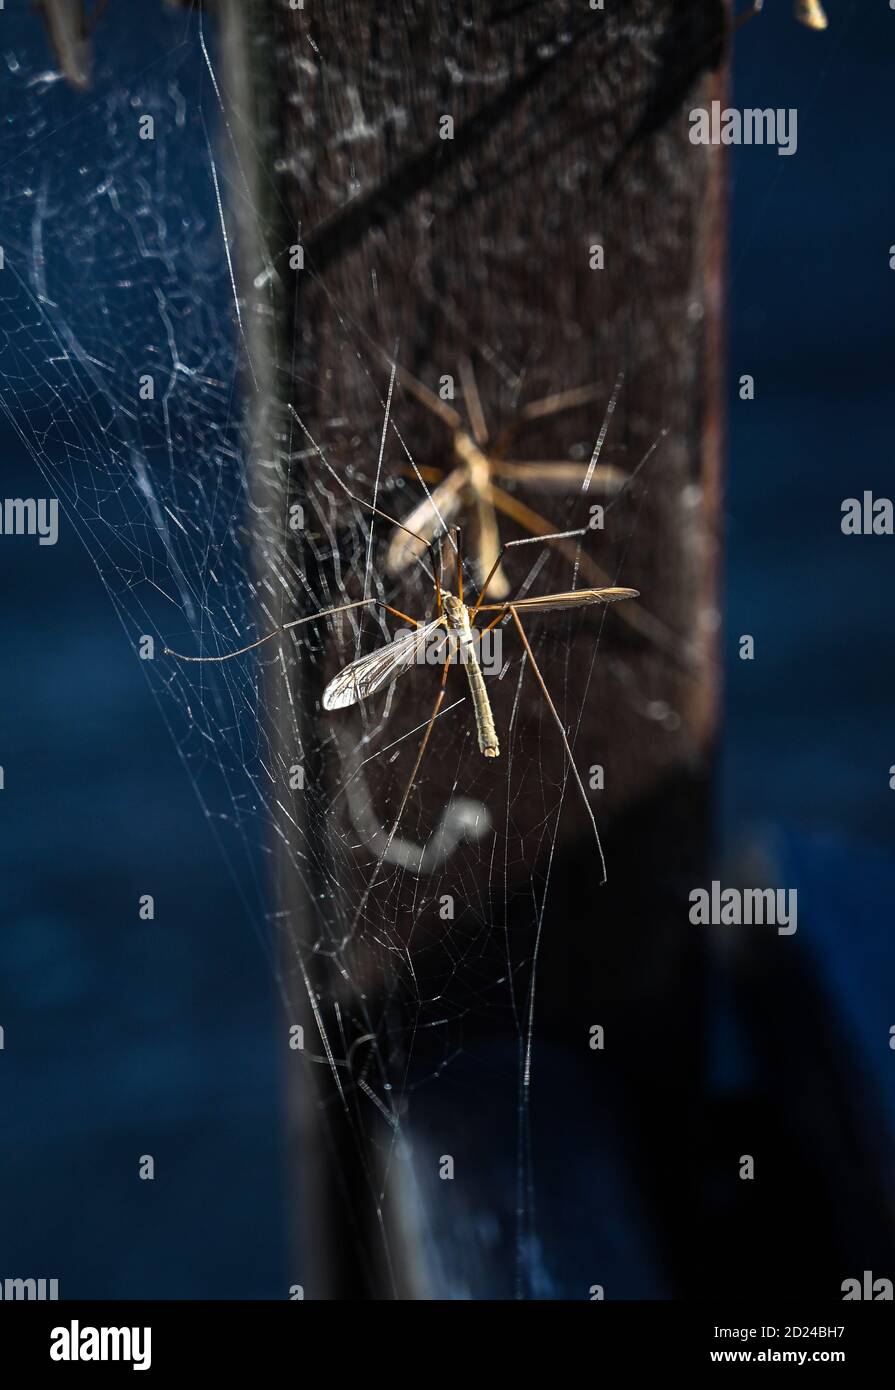 Crane Fly or Craneflies also known as  daddy longlegs or long-legged fly is grey-brown .Cranefly Scientific name Tipula paludosa trapped in cobweb Stock Photo